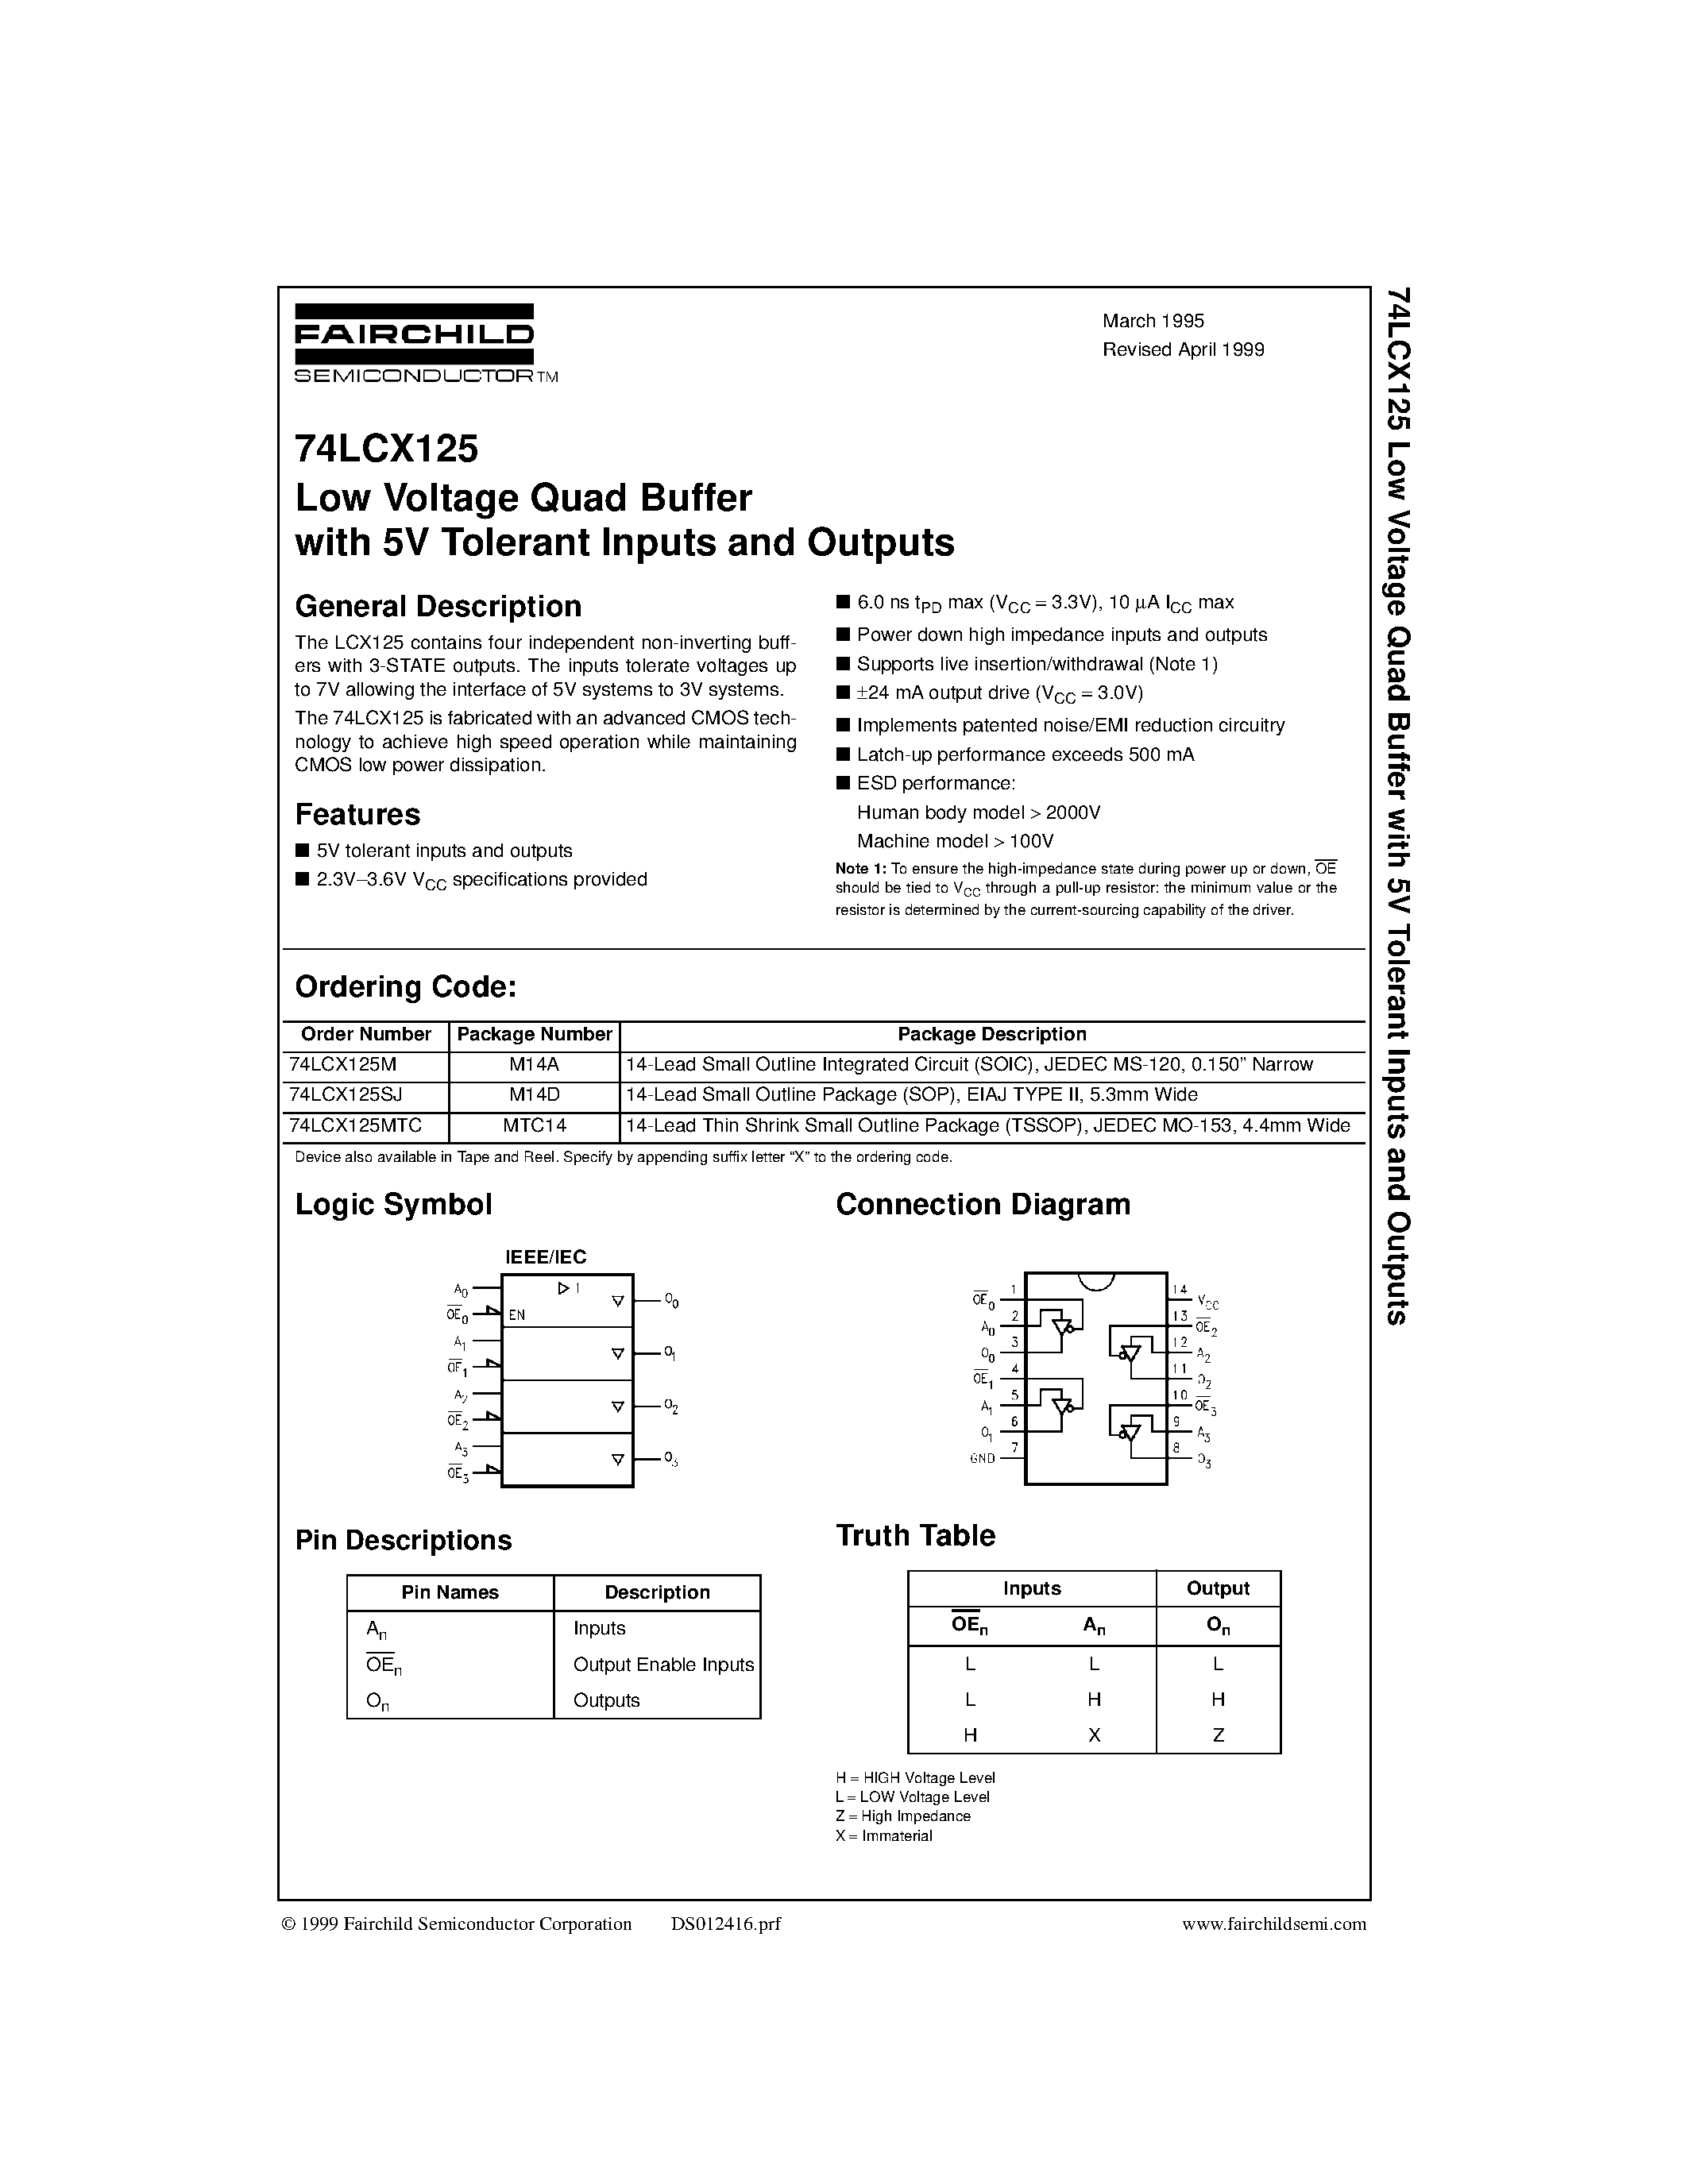 Datasheet 74LCX125M - Low Voltage Quad Buffer with 5V Tolerant Inputs and Outputs page 1